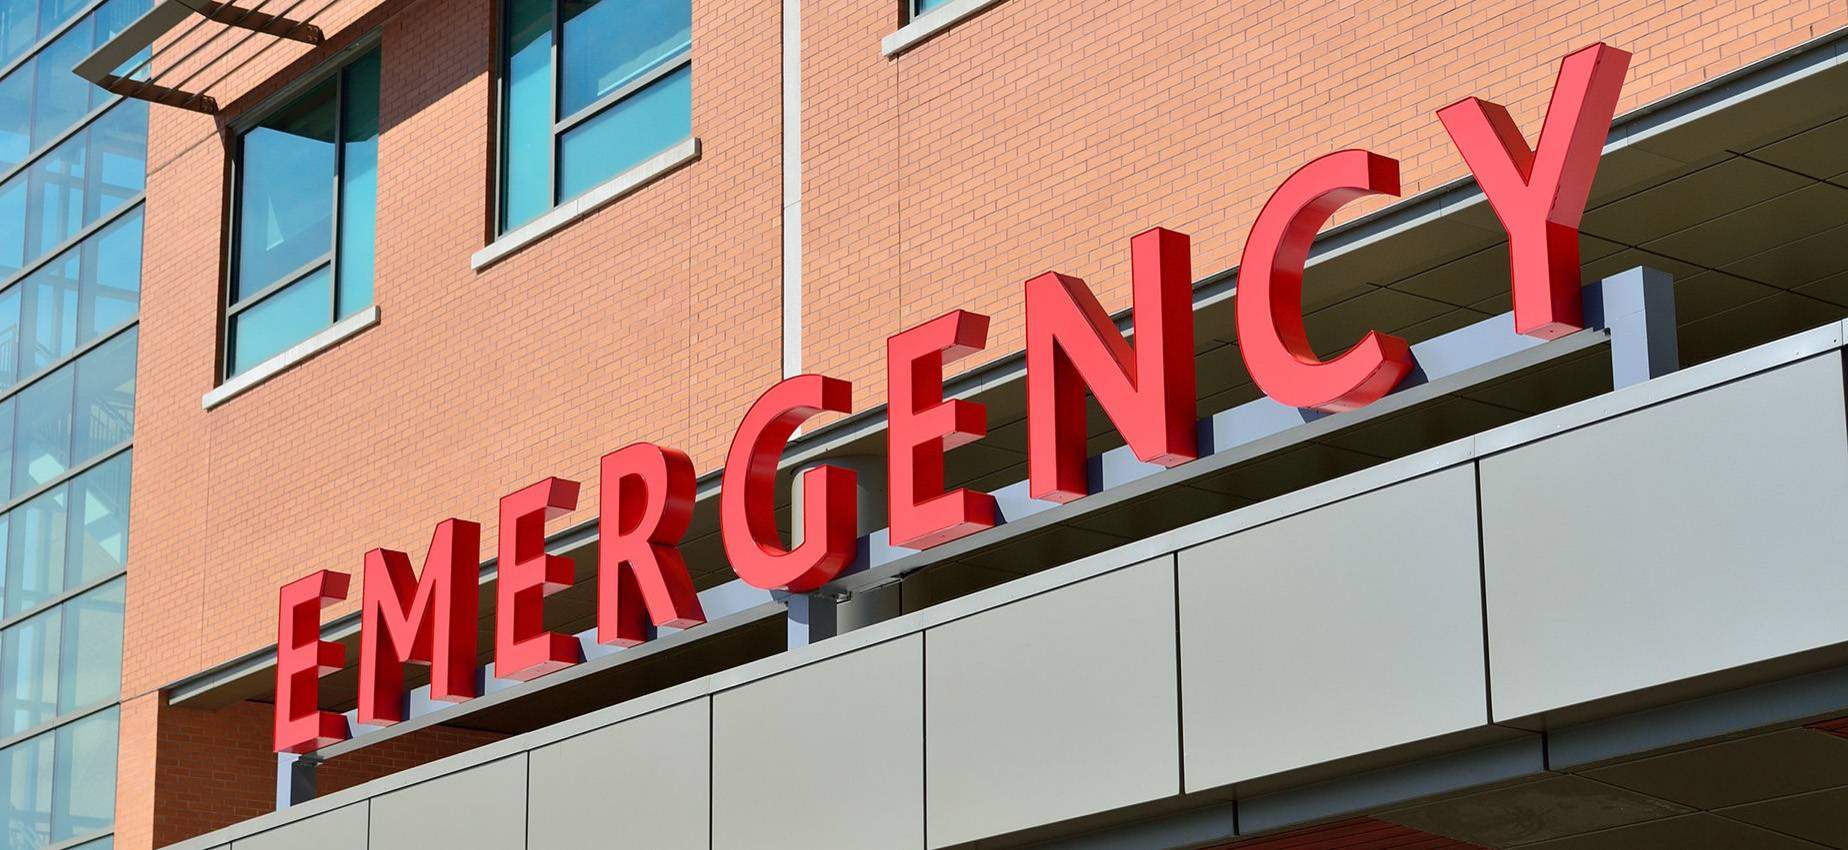 photo of emergency sign at hospital